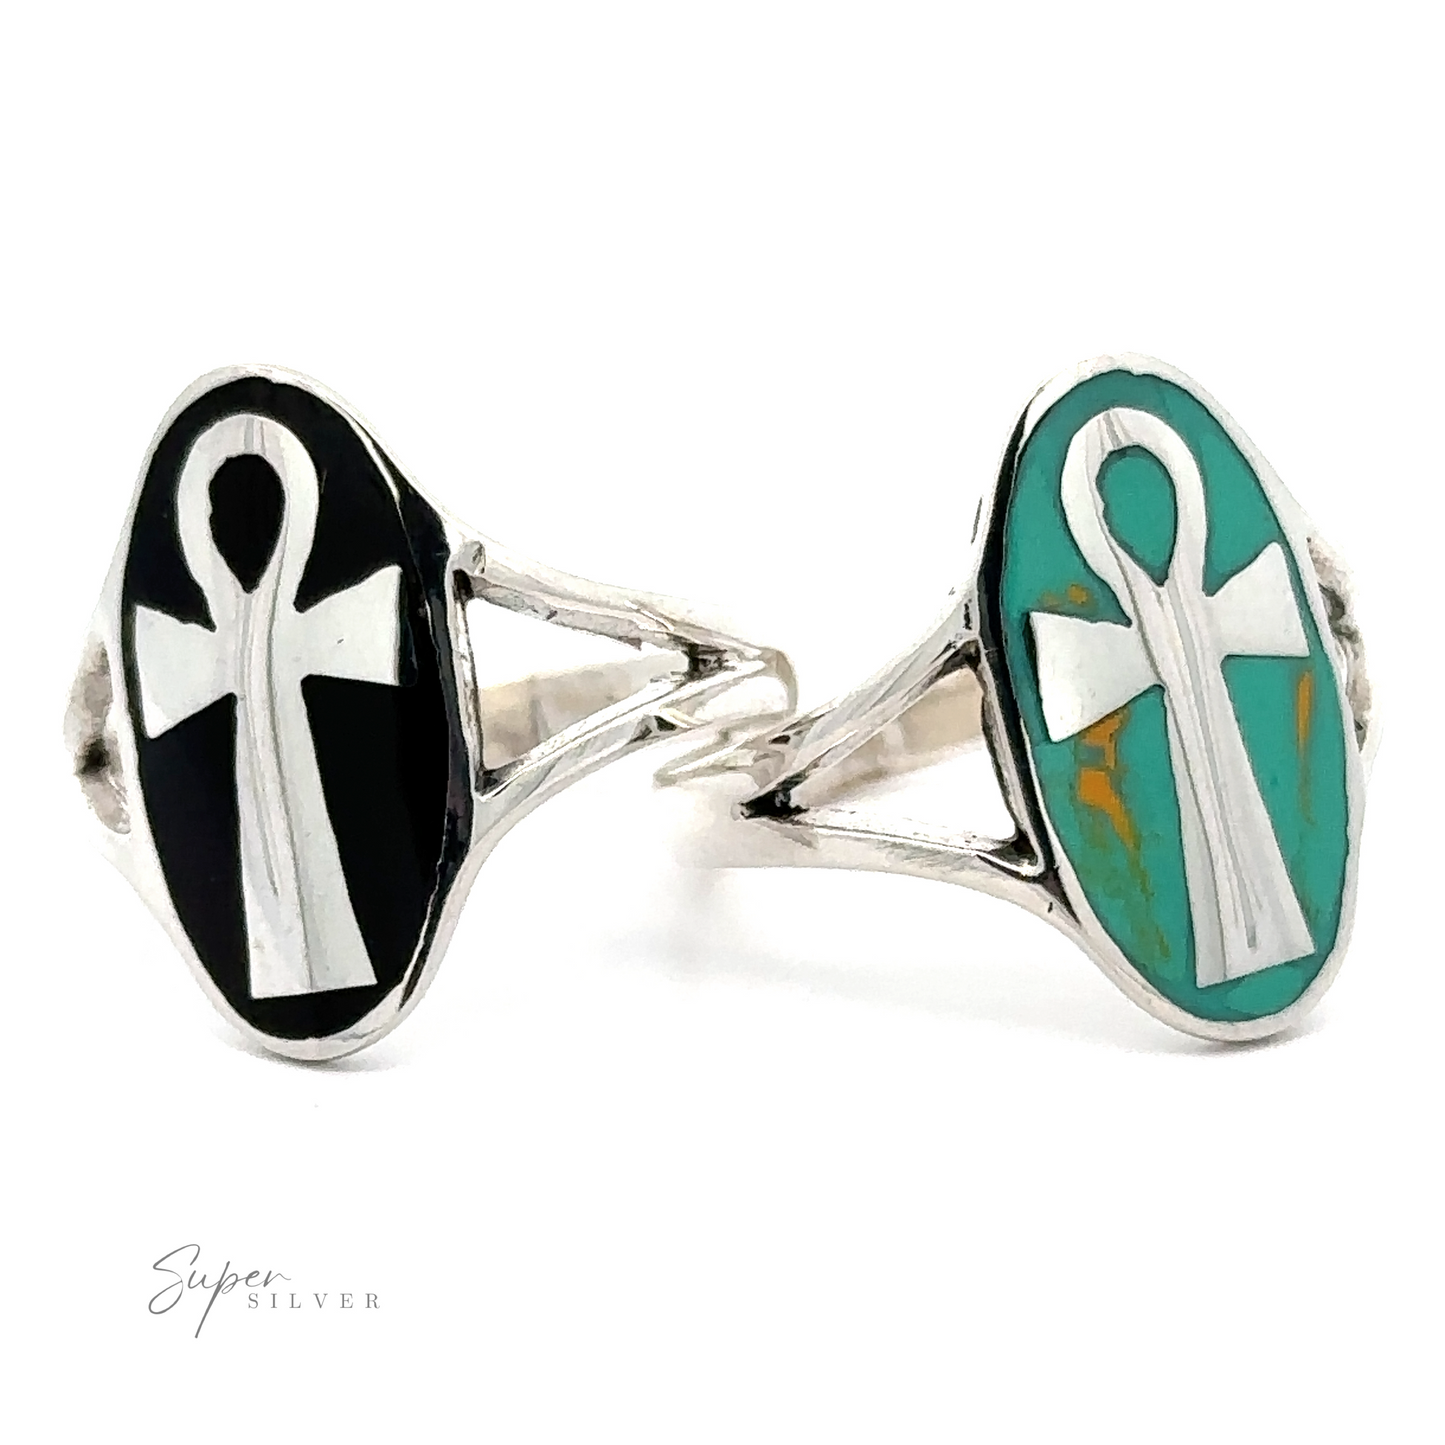 An Ankh ring with a cross and turquoise stones, made of sterling silver.